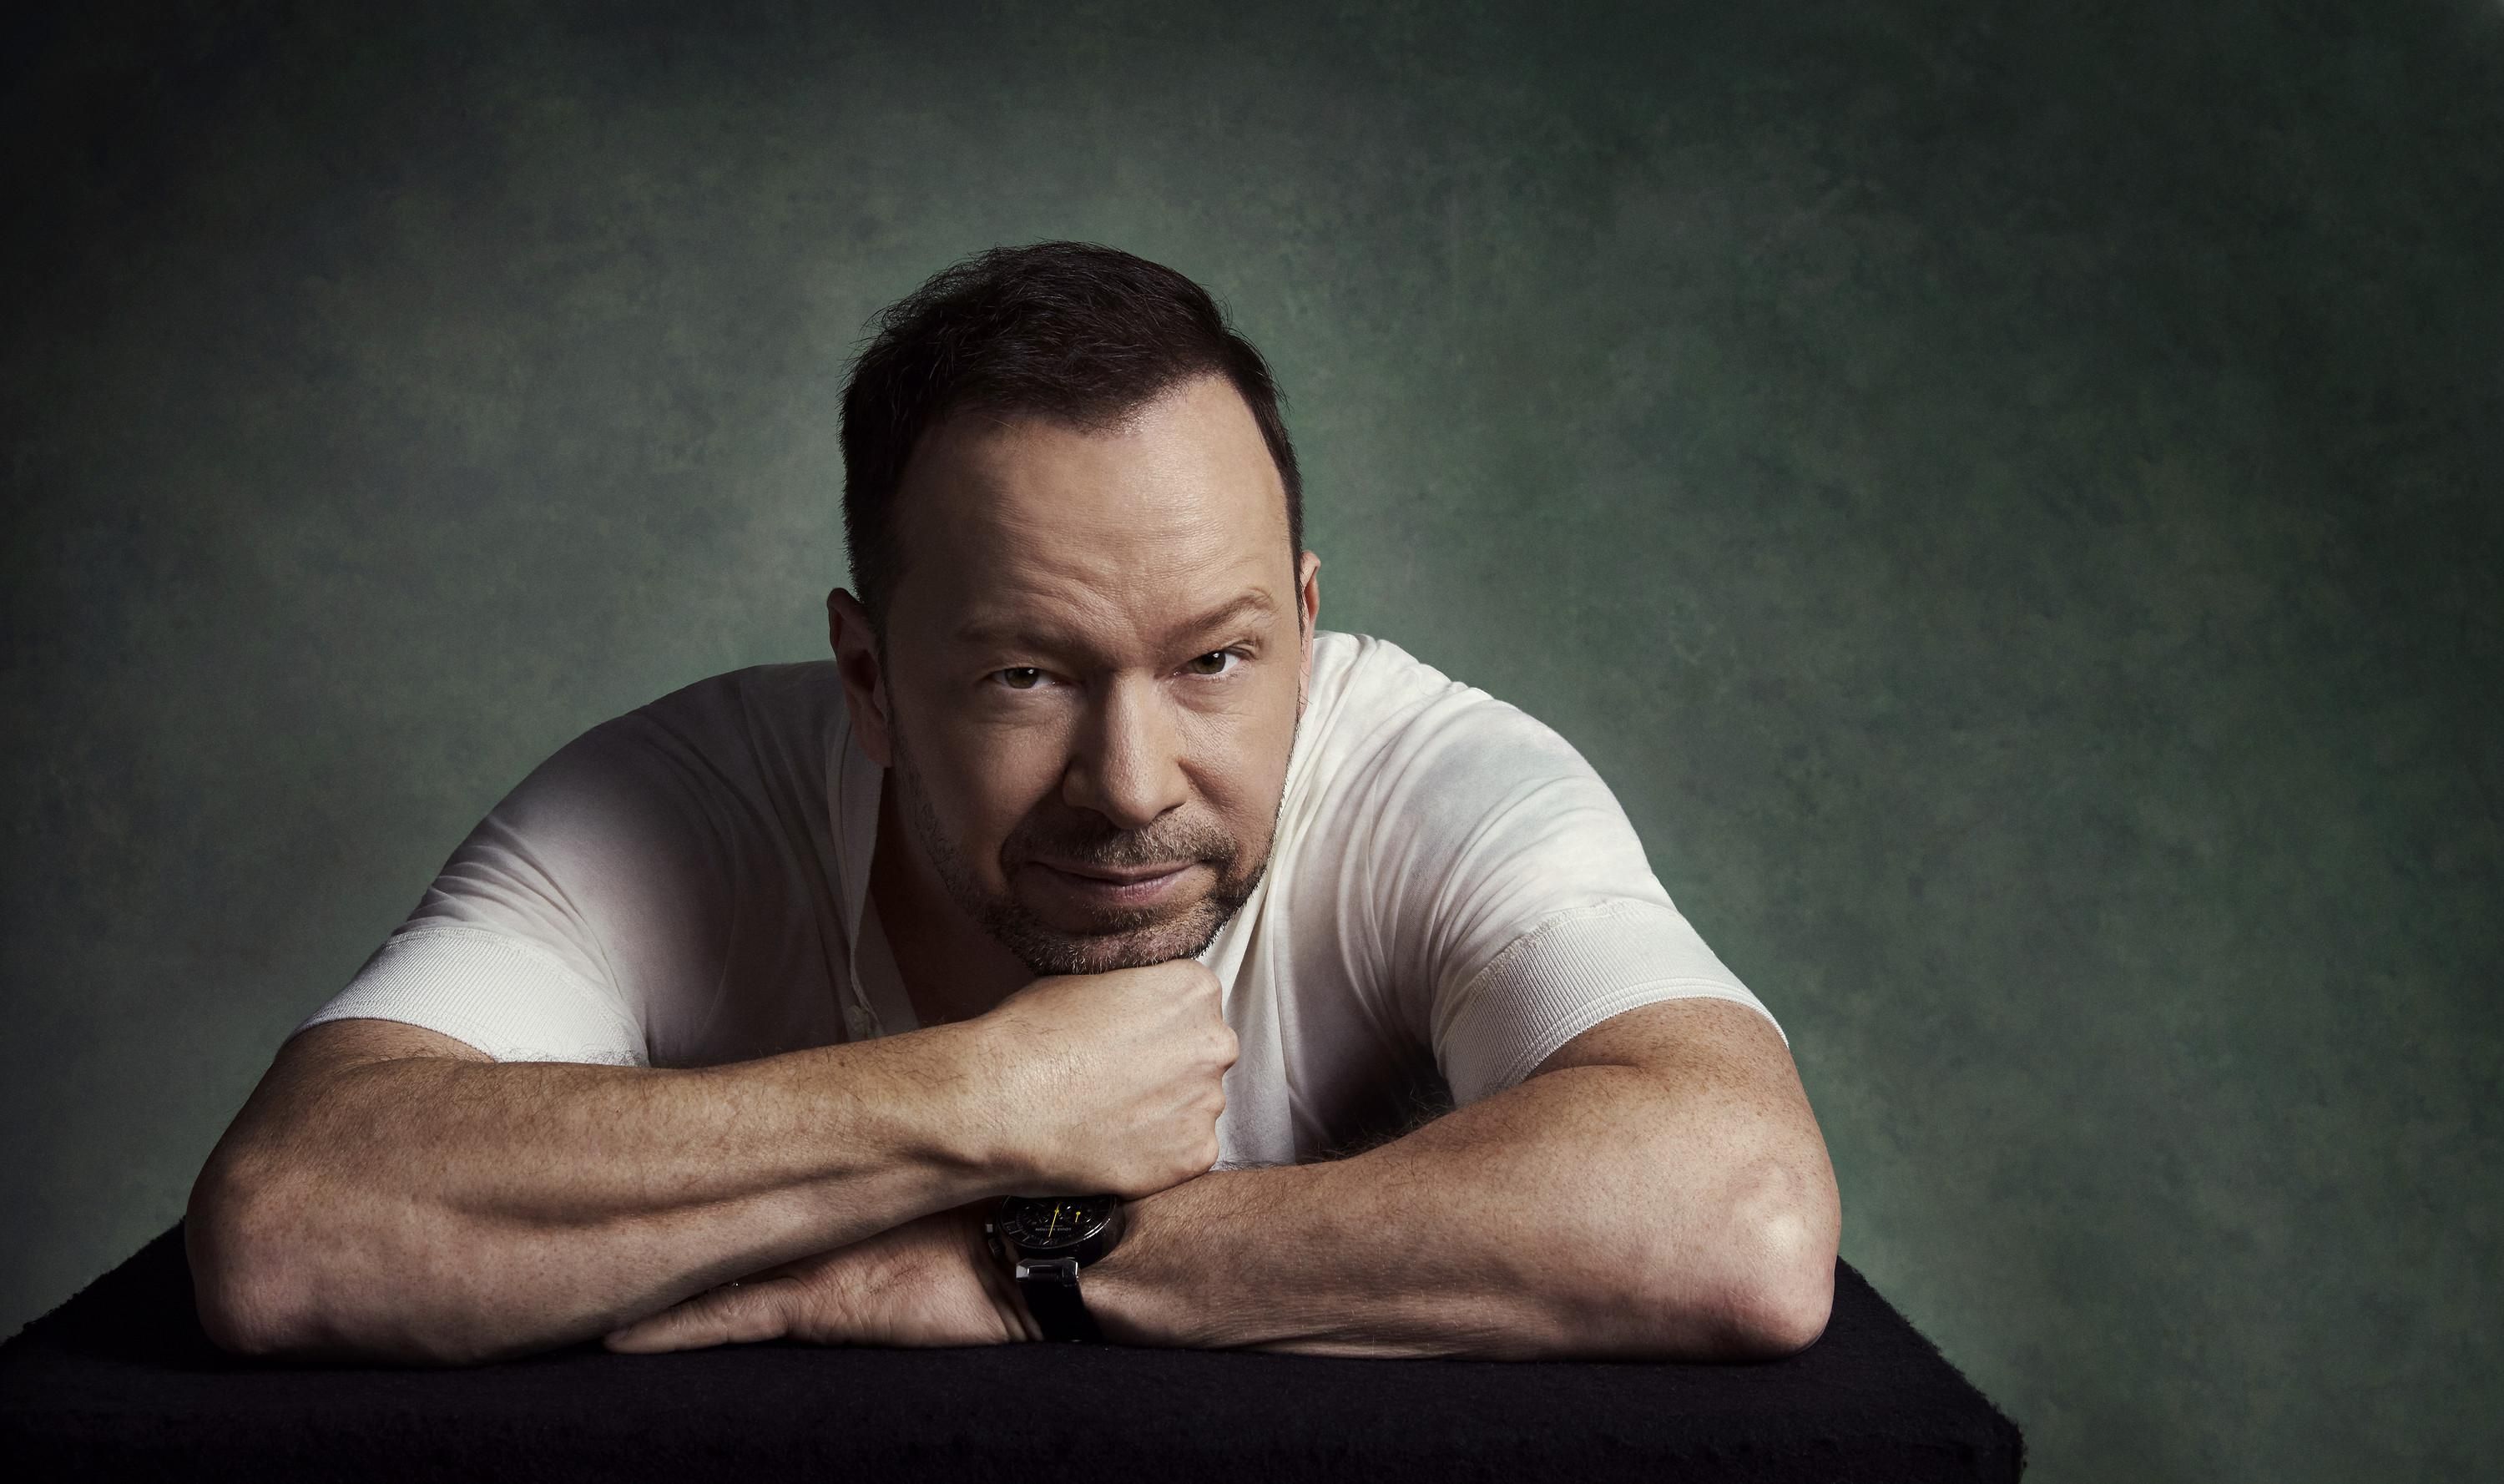 Donnie Wahlberg wearing a white T-shirt and leaning on his elbows staring at the camera